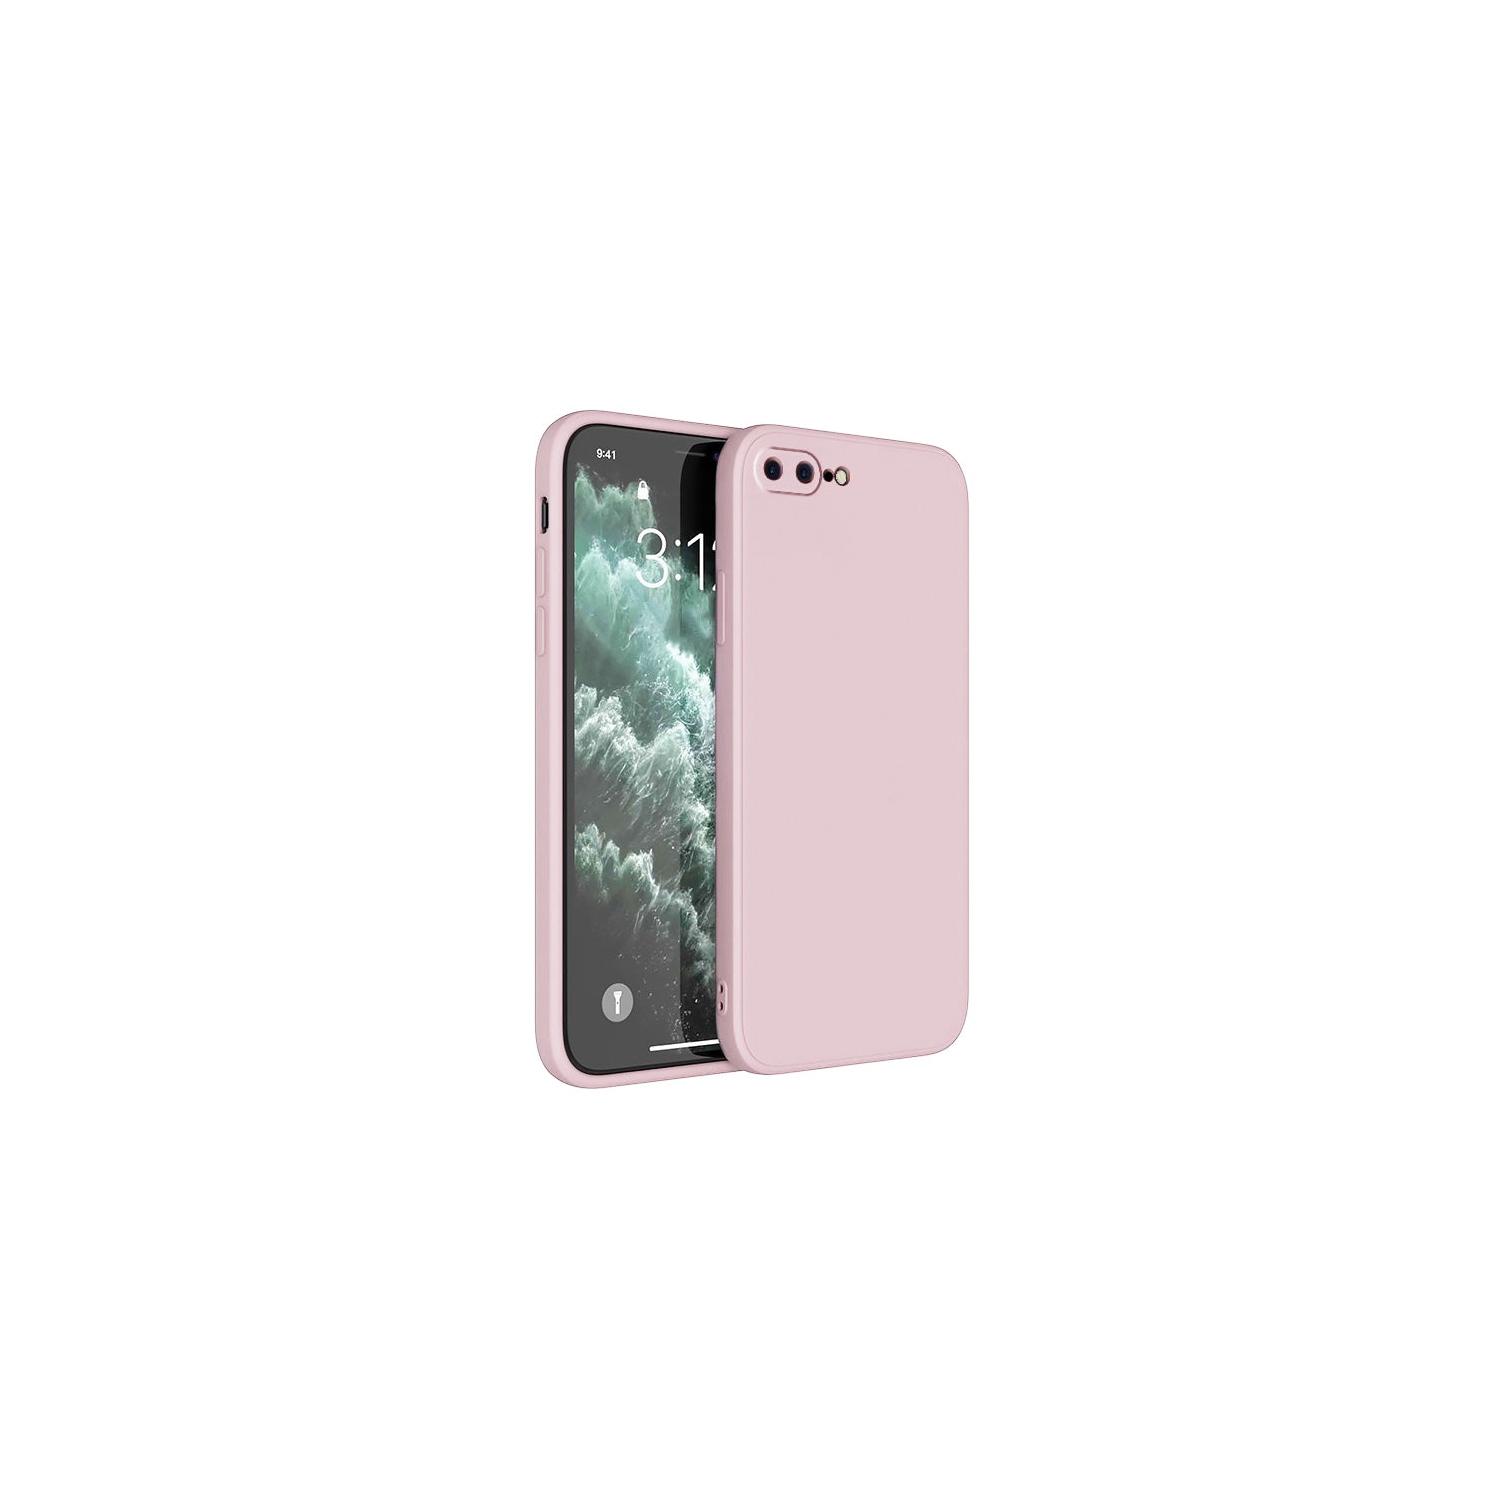 PANDACO Soft Shell Matte Pink Case for iPhone 7 Plus or iPhone 8 Plus